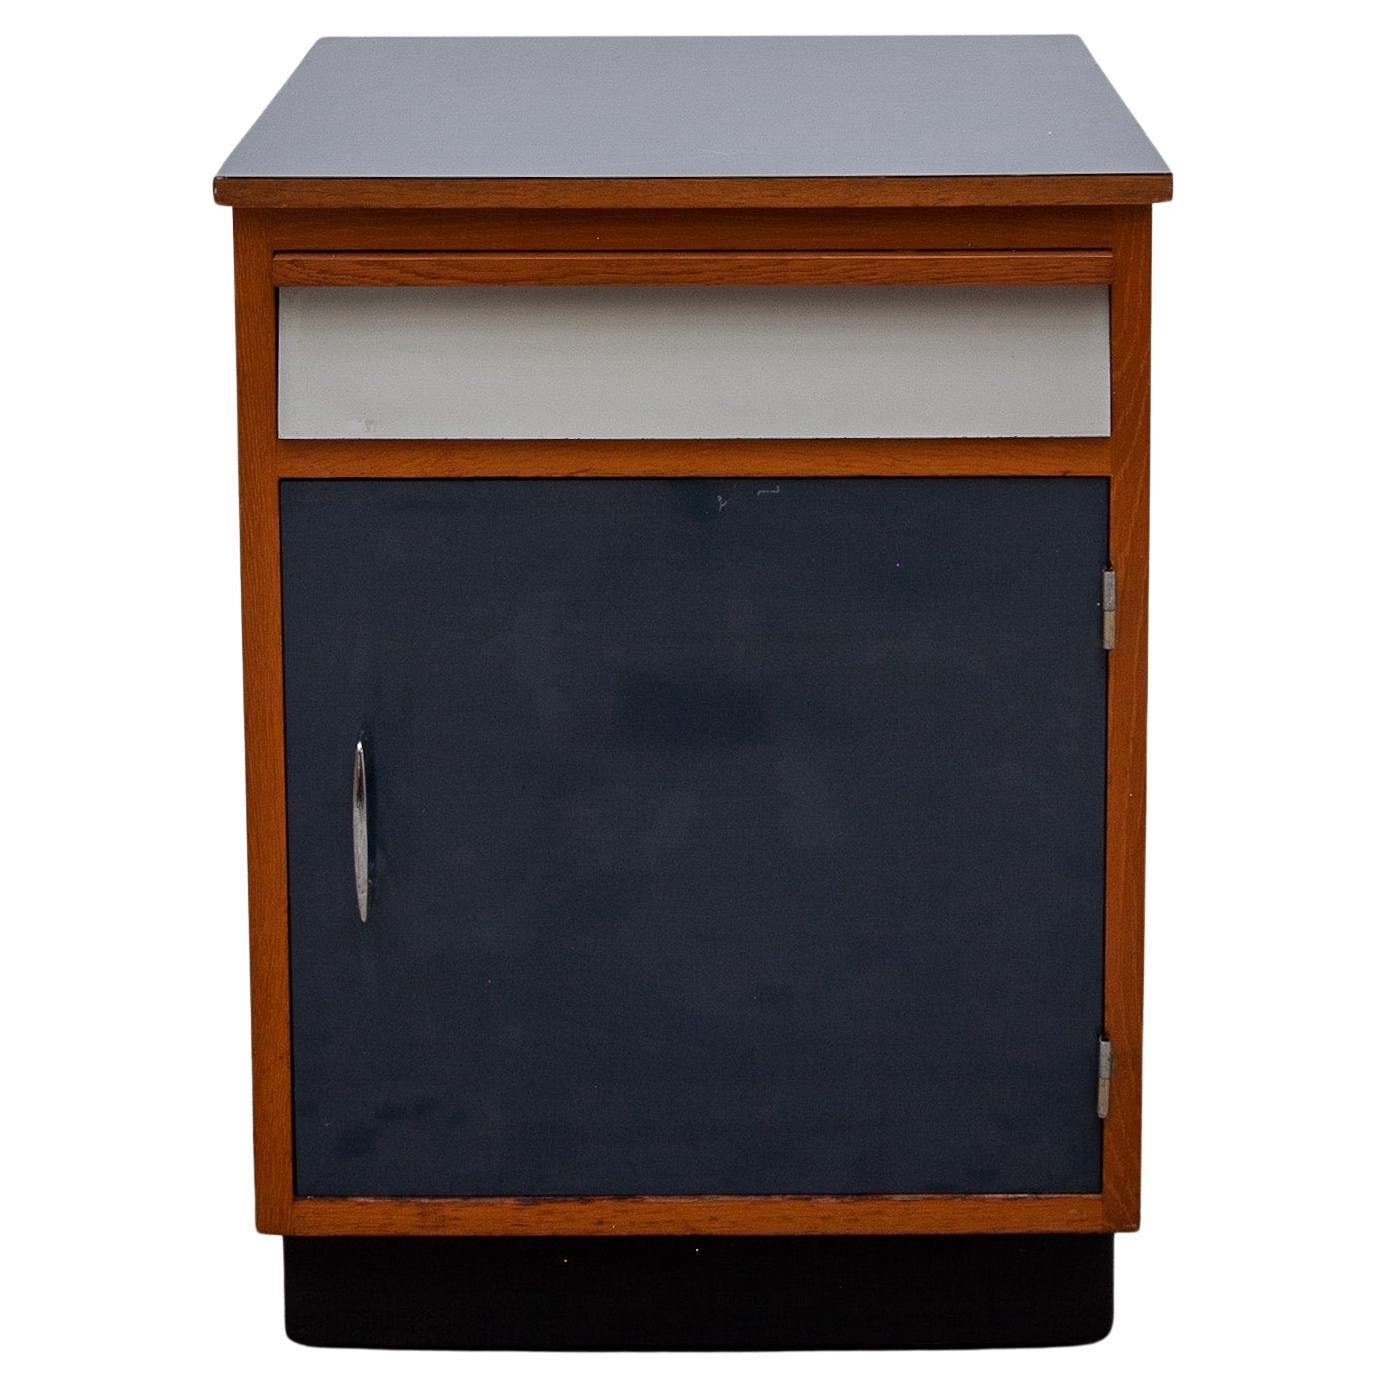 Modernist Blue and White Laminate Fifties Small Sideboard Tubax 1958, Belgium For Sale